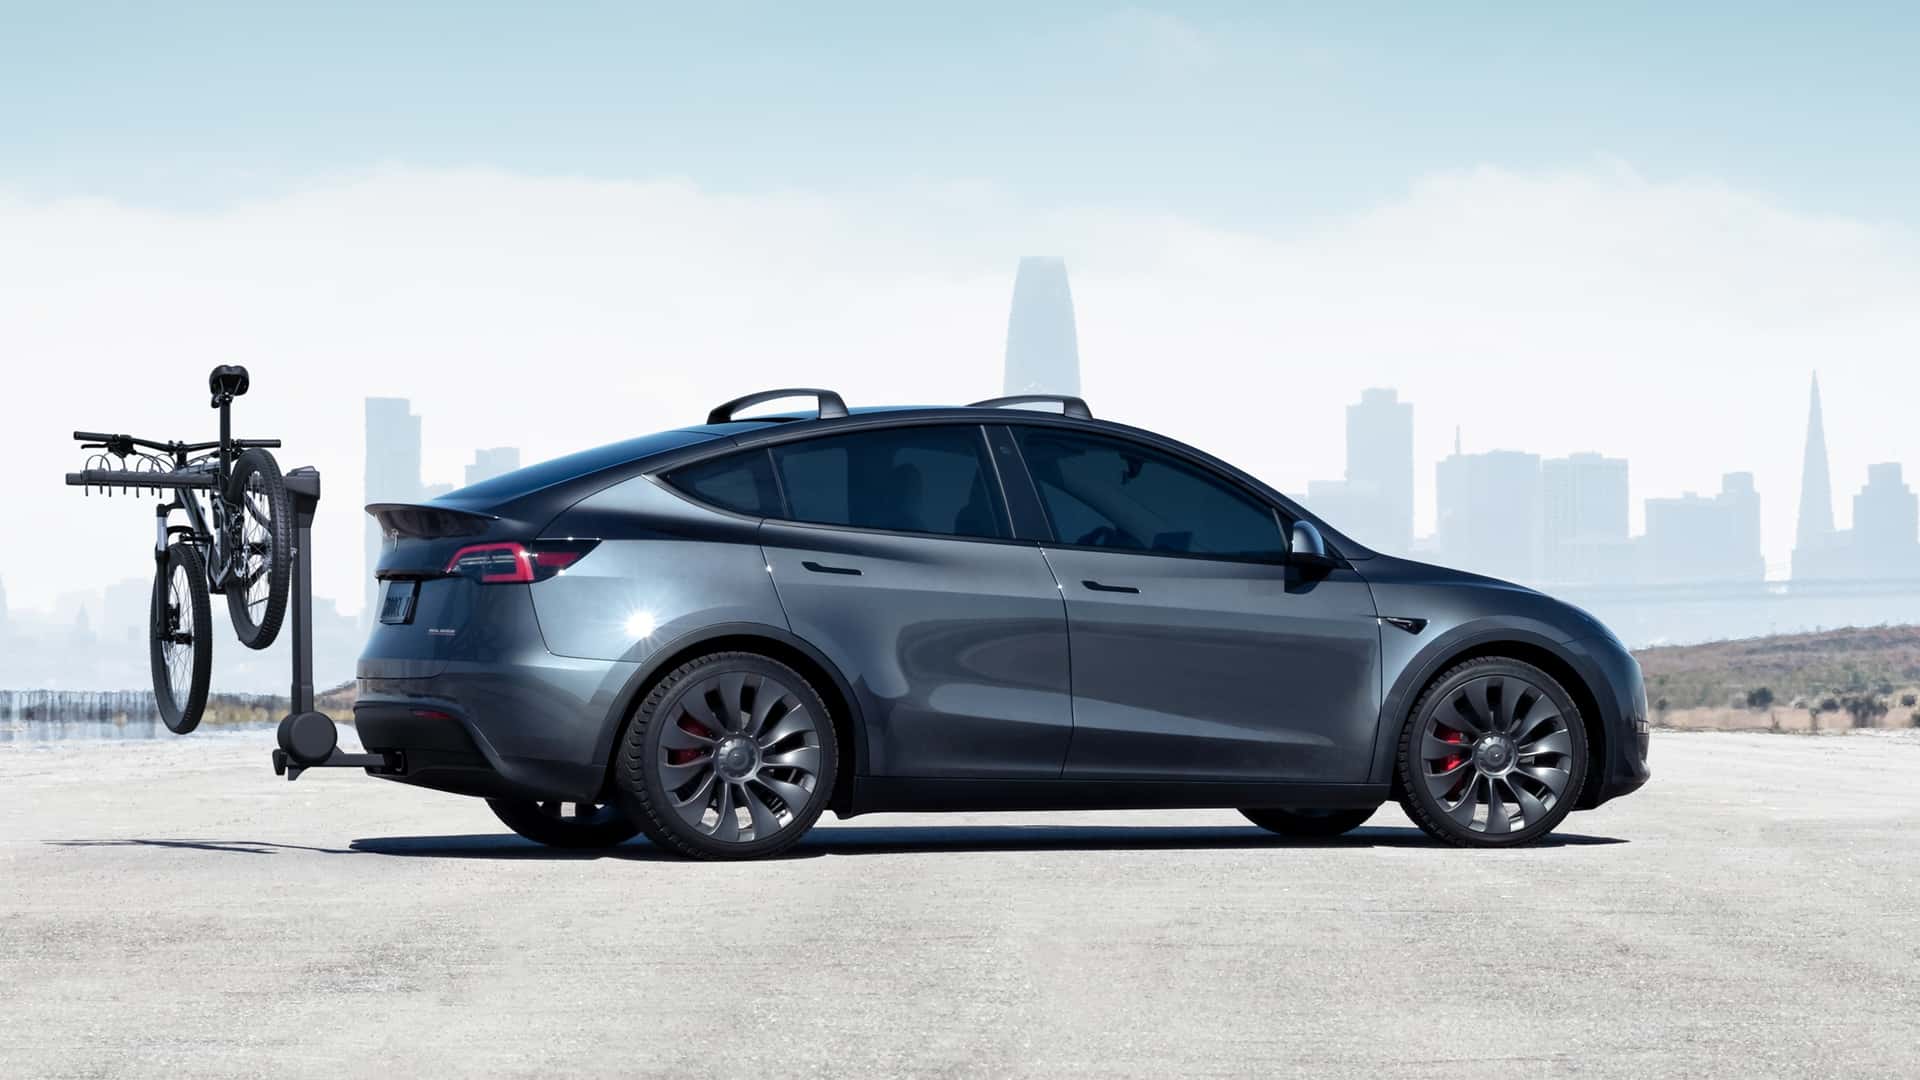 tesla cut model y prices by $1,000, but this is not a typical tesla adjustment